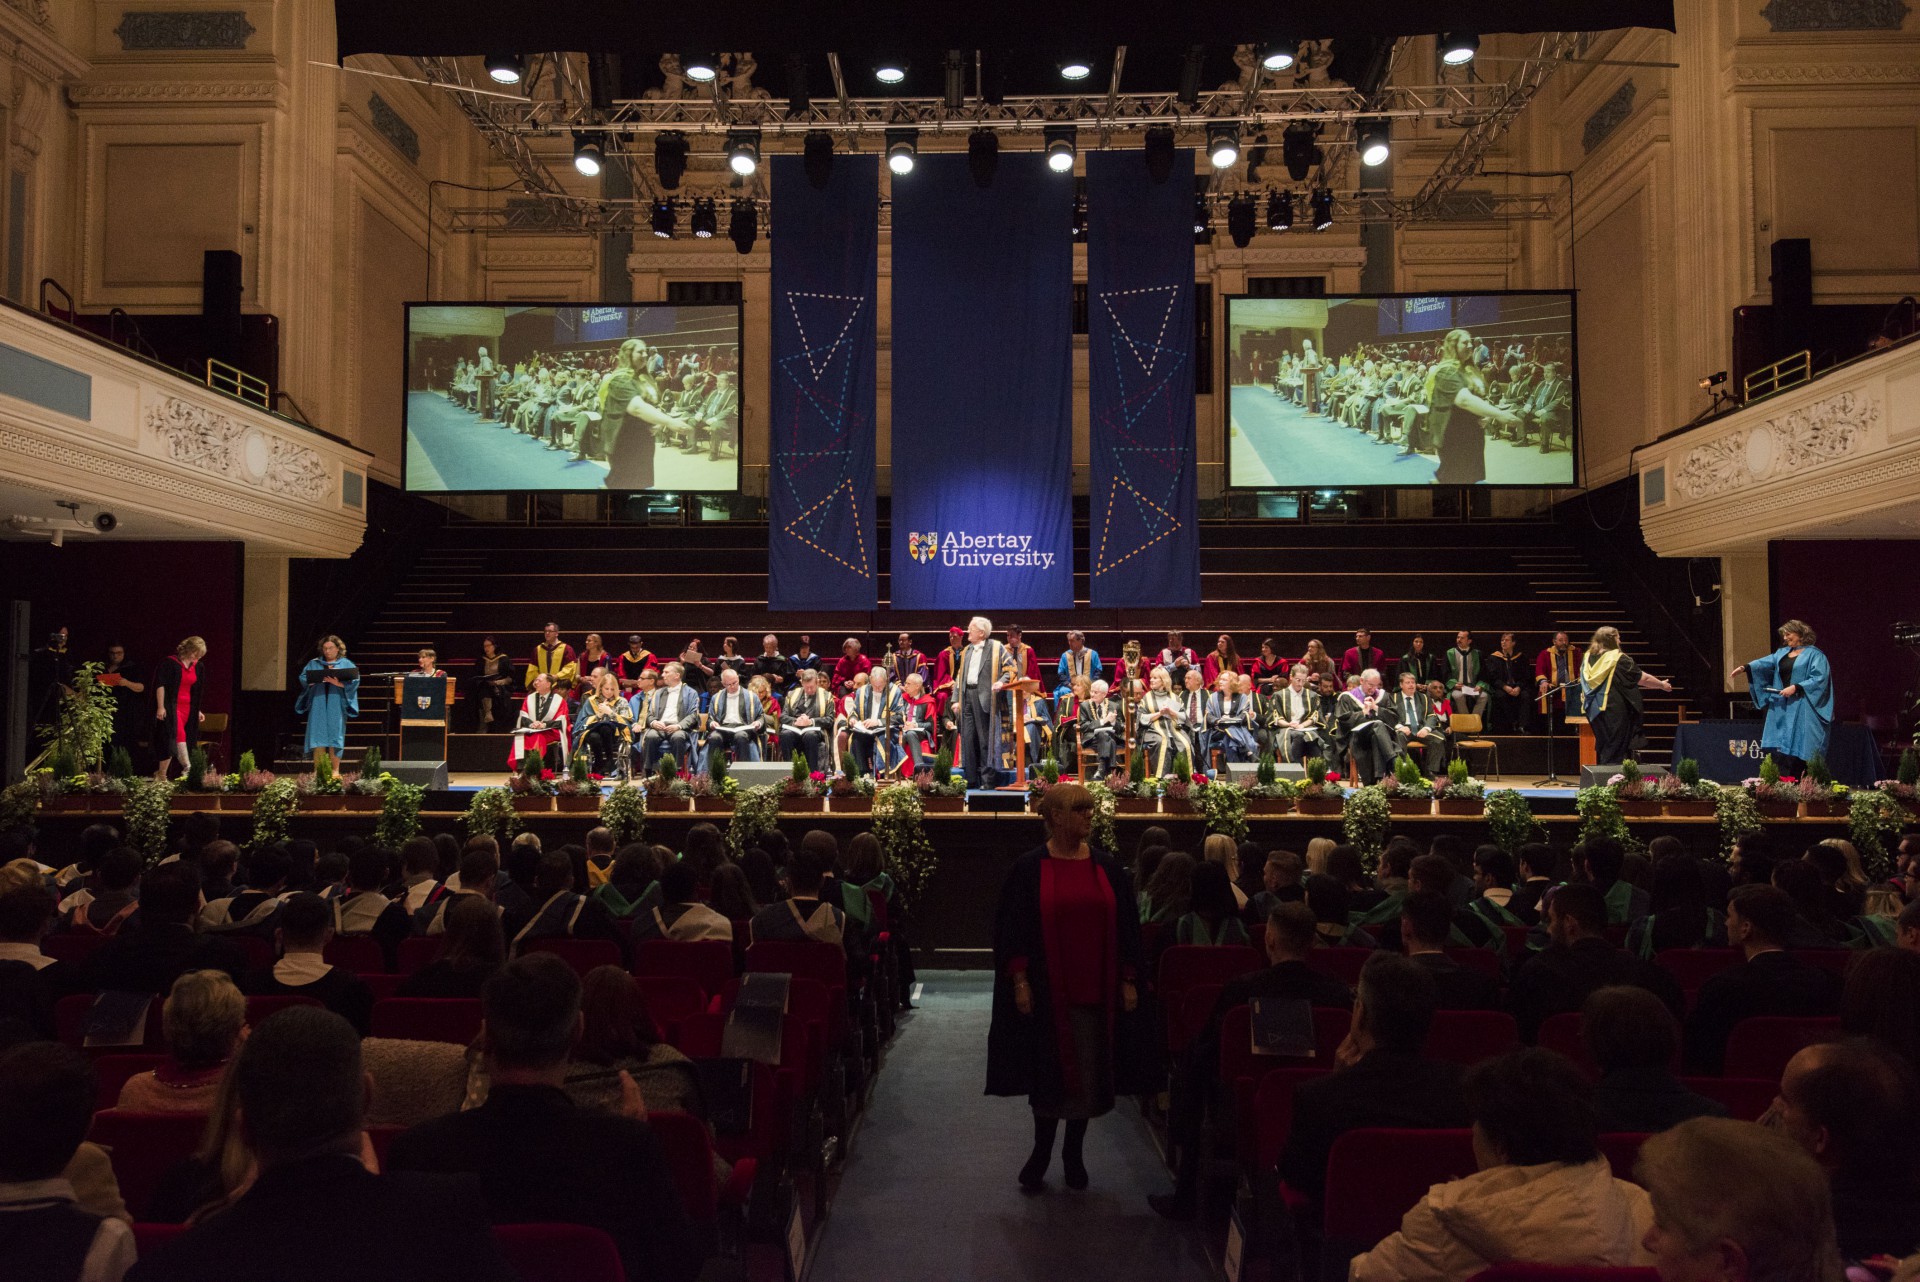 This year's Summer Graduation ceremonies will take place over three days from July 13-15